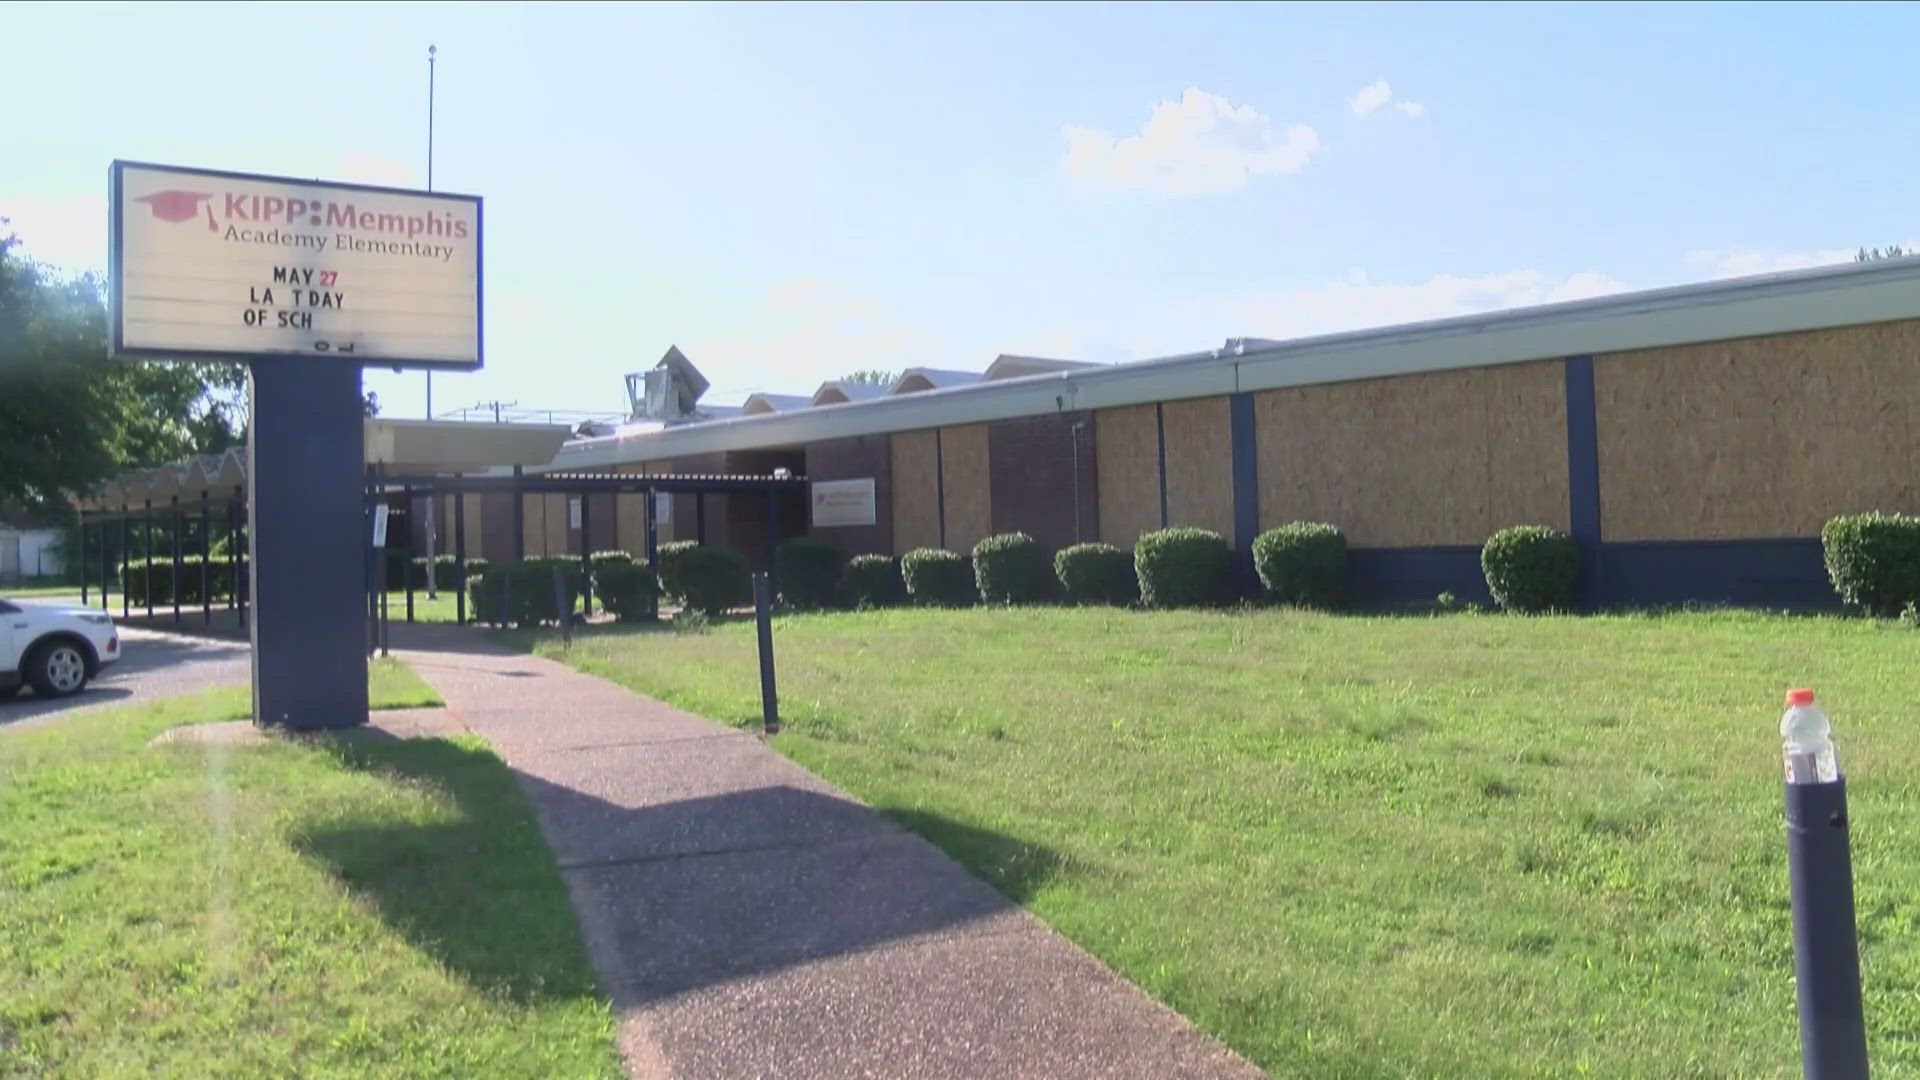 ABC24 discovered the district has responded to the issues surrounding Kipp Memphis Academy Elementary, formerly known as Shannon Elementary.